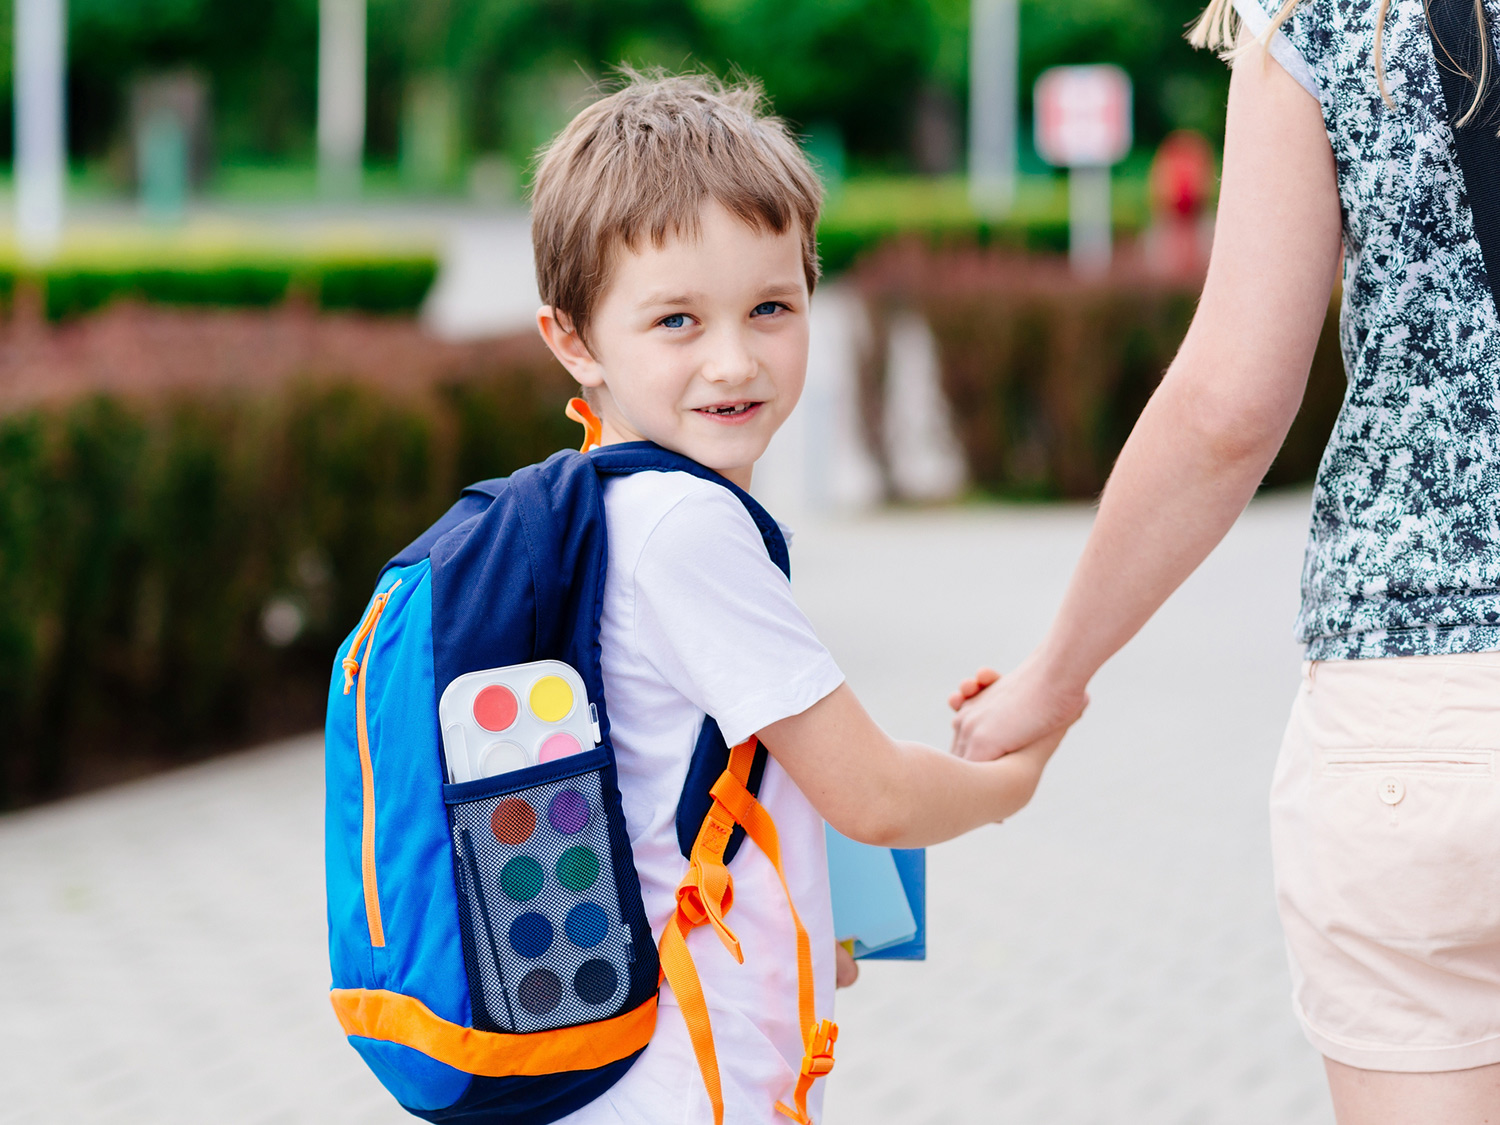 8 Tips to Prepare for the First Days of School